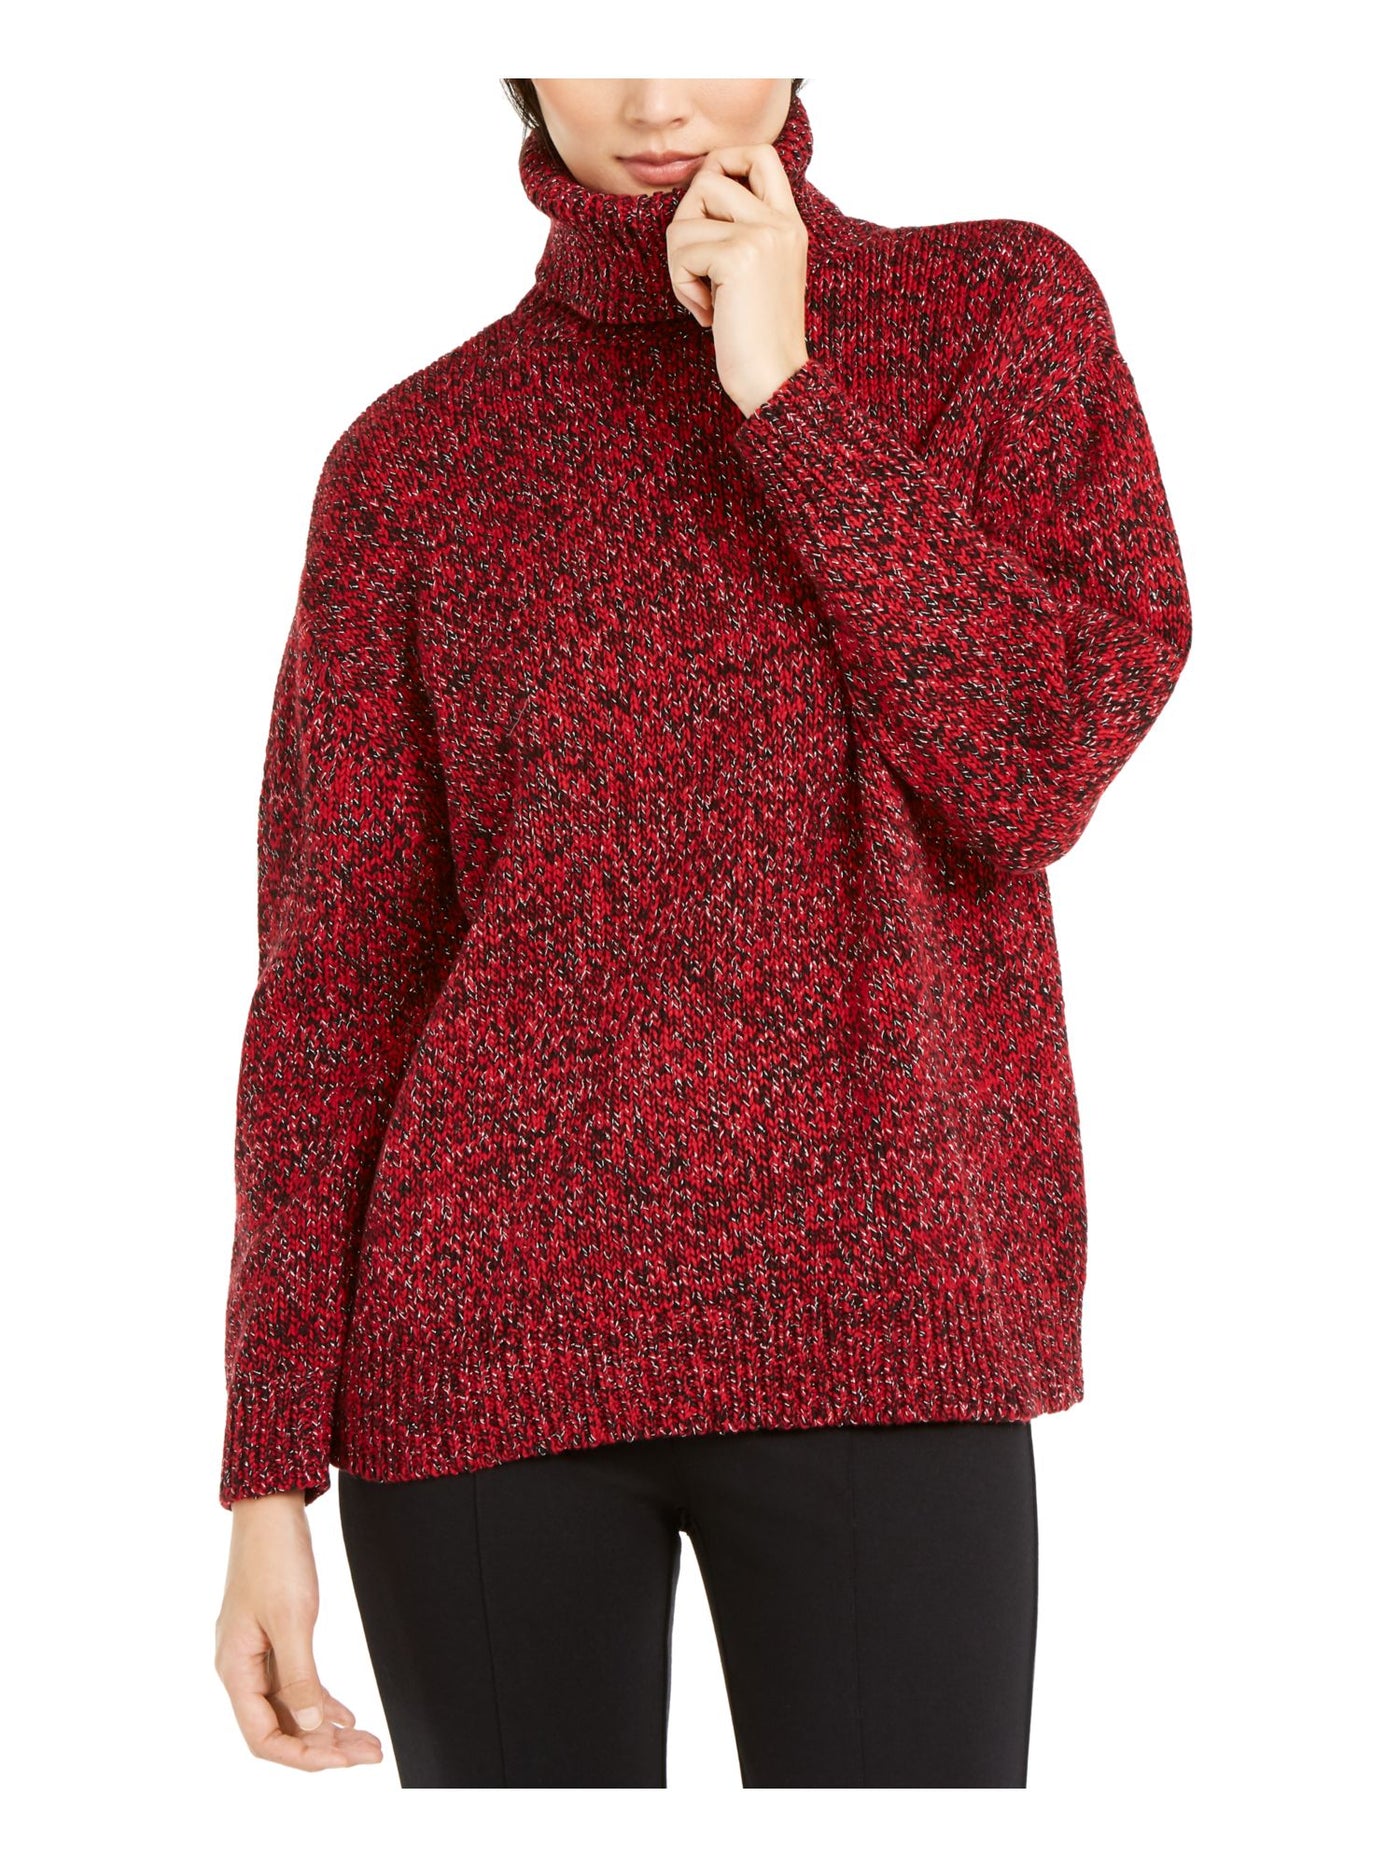 MICHAEL KORS Womens Red Long Sleeve Turtle Neck Sweater S